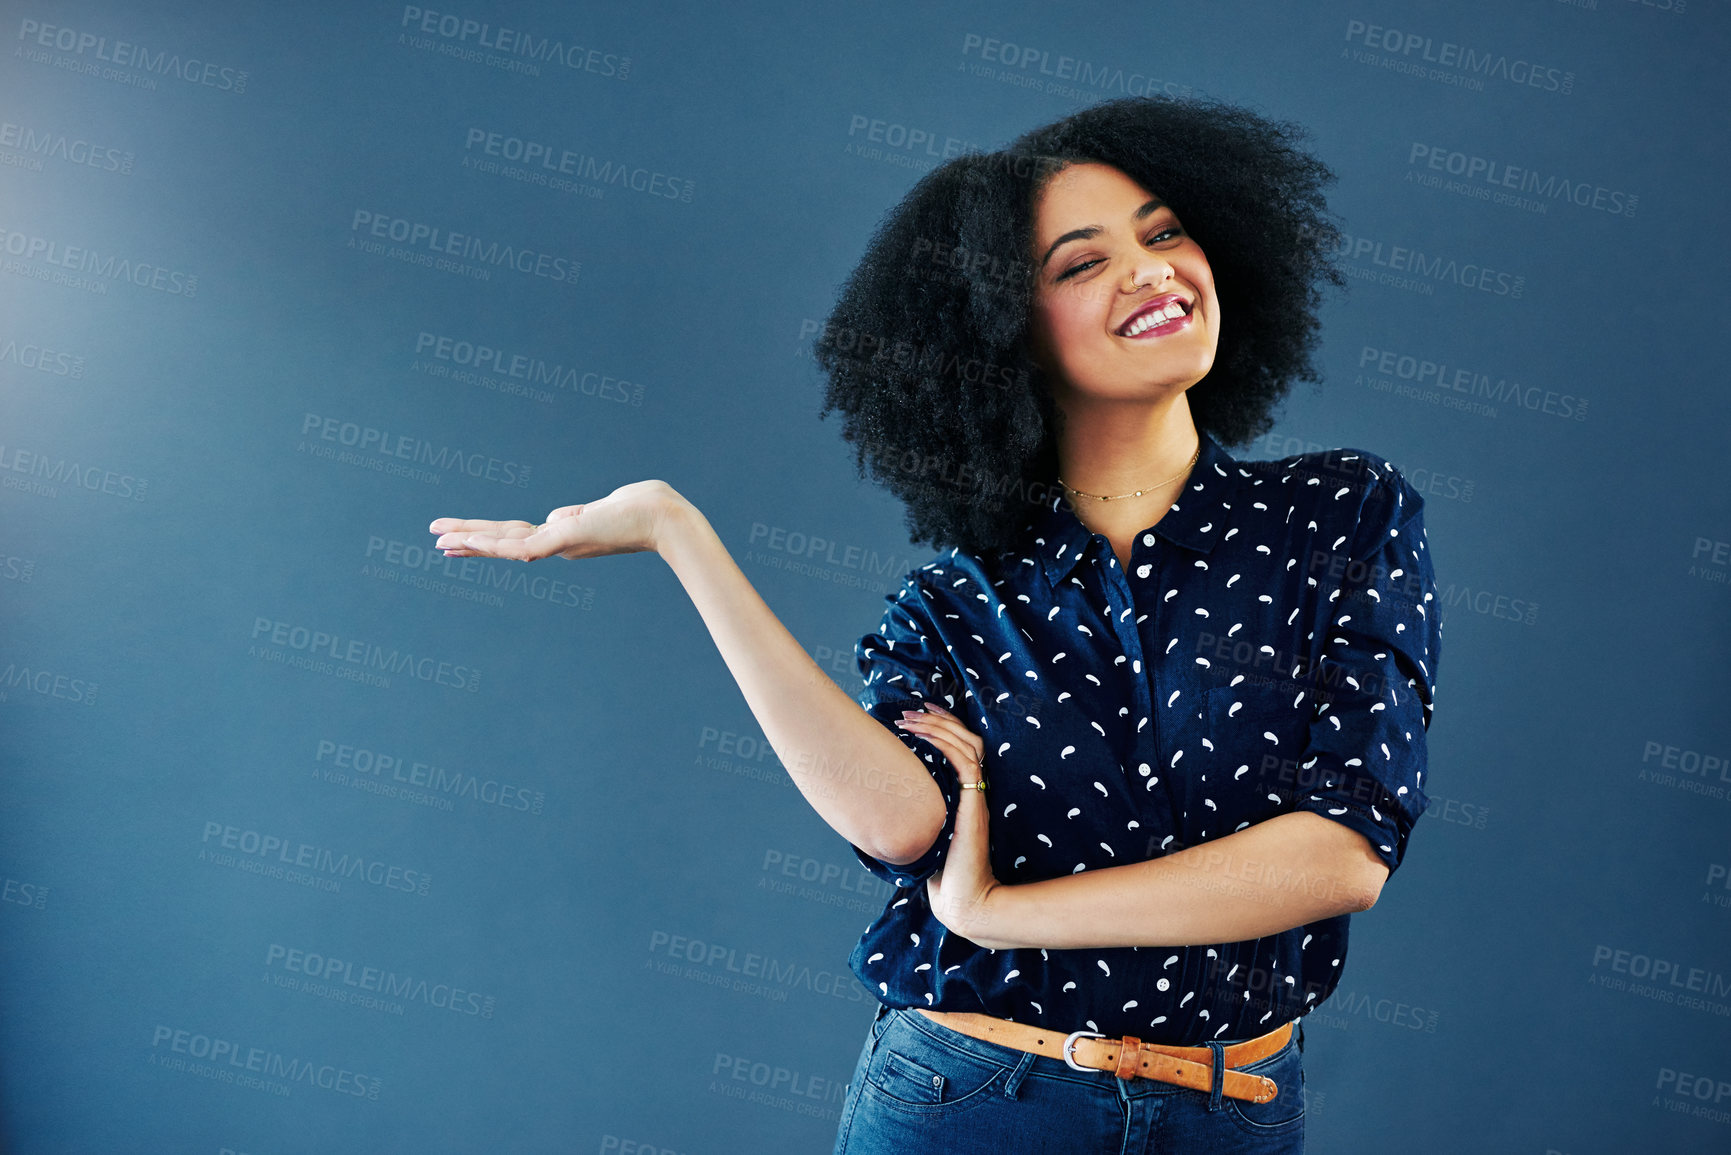 Buy stock photo Studio shot of a young woman gesturing towards copy space against a blue background